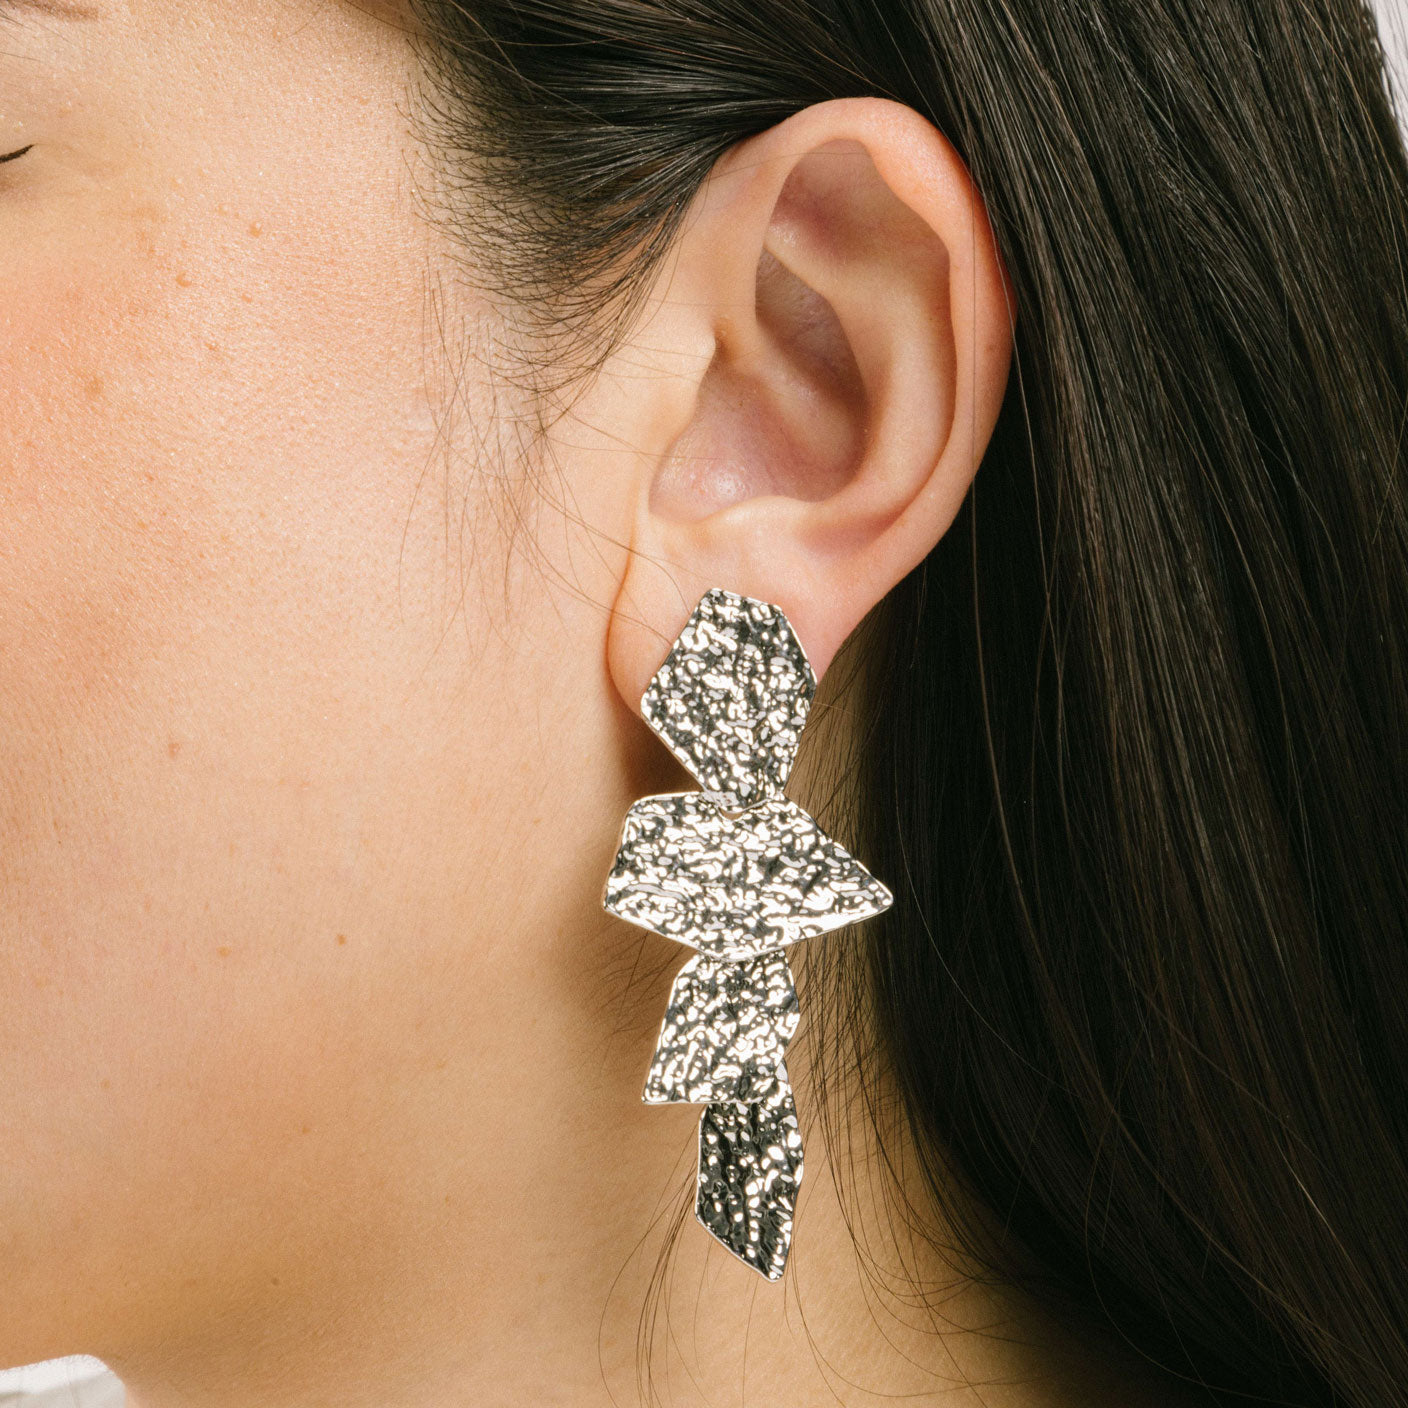 A model wearing the Manhattan Drop Clip On Earrings in Silver provide a secure and comfortable fit for any ear type. The padded clip-on design features a zinc and copper alloy construction, and lasts approximately 8-12 hours. As the earring pairs are non-adjustable, each purchase contains a single pair.